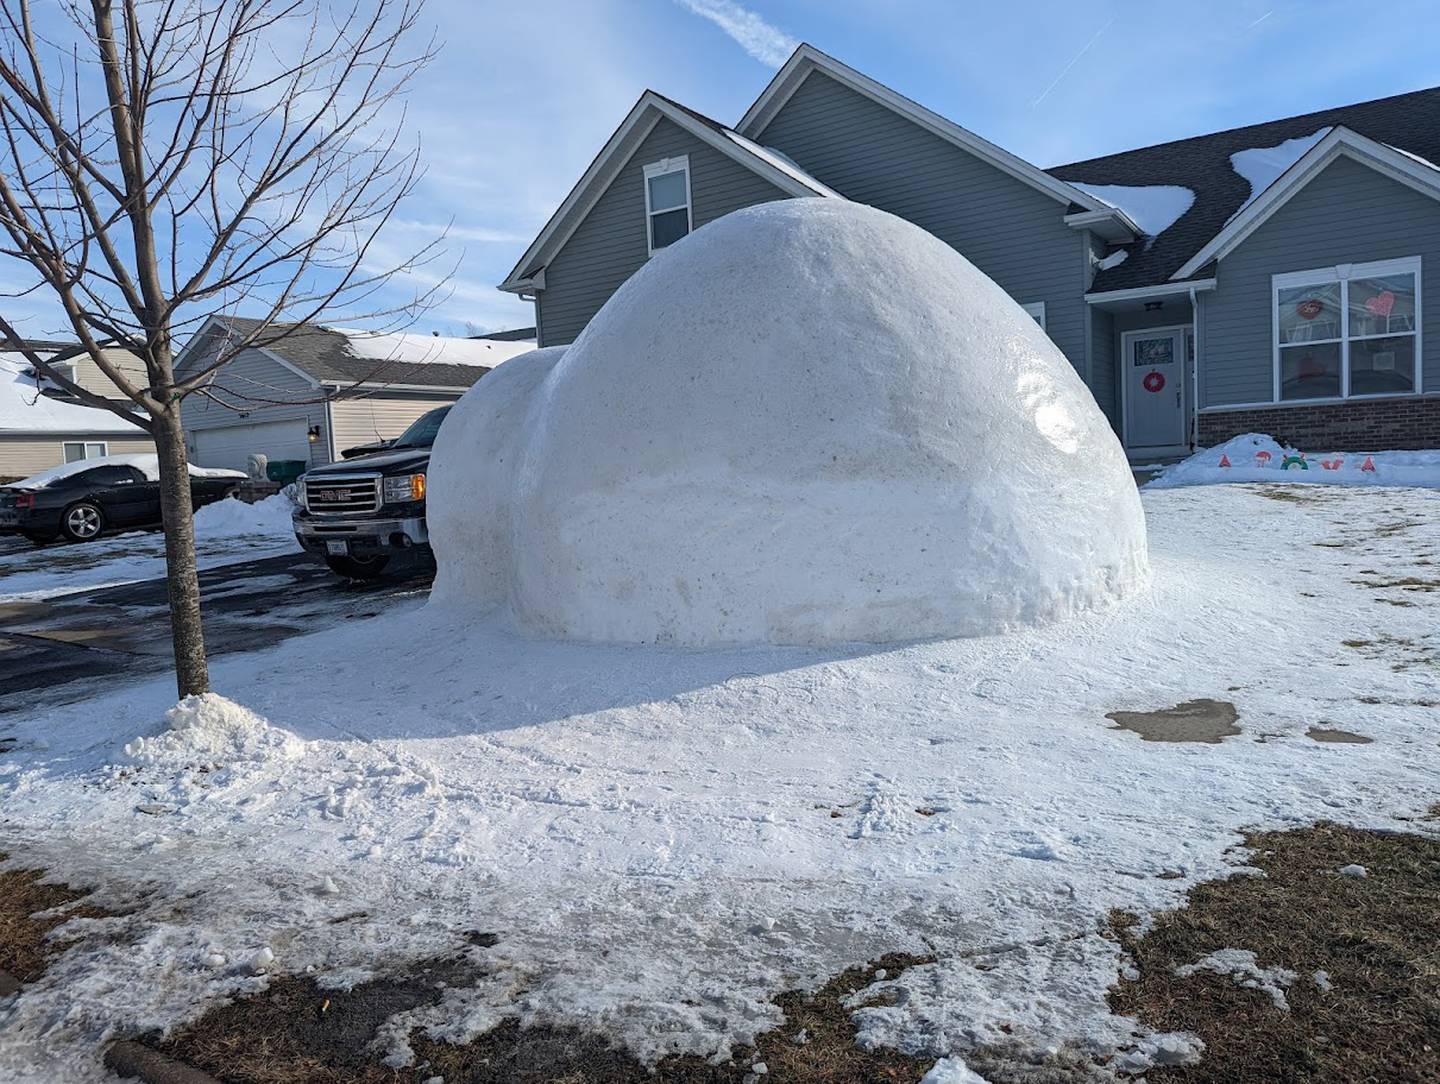 For the last five years, Lee Peters of Plainfield has built an igloo in the yard of his home. He used to build them with his father and sister when growing up and wanted to pass the skill to his own children.